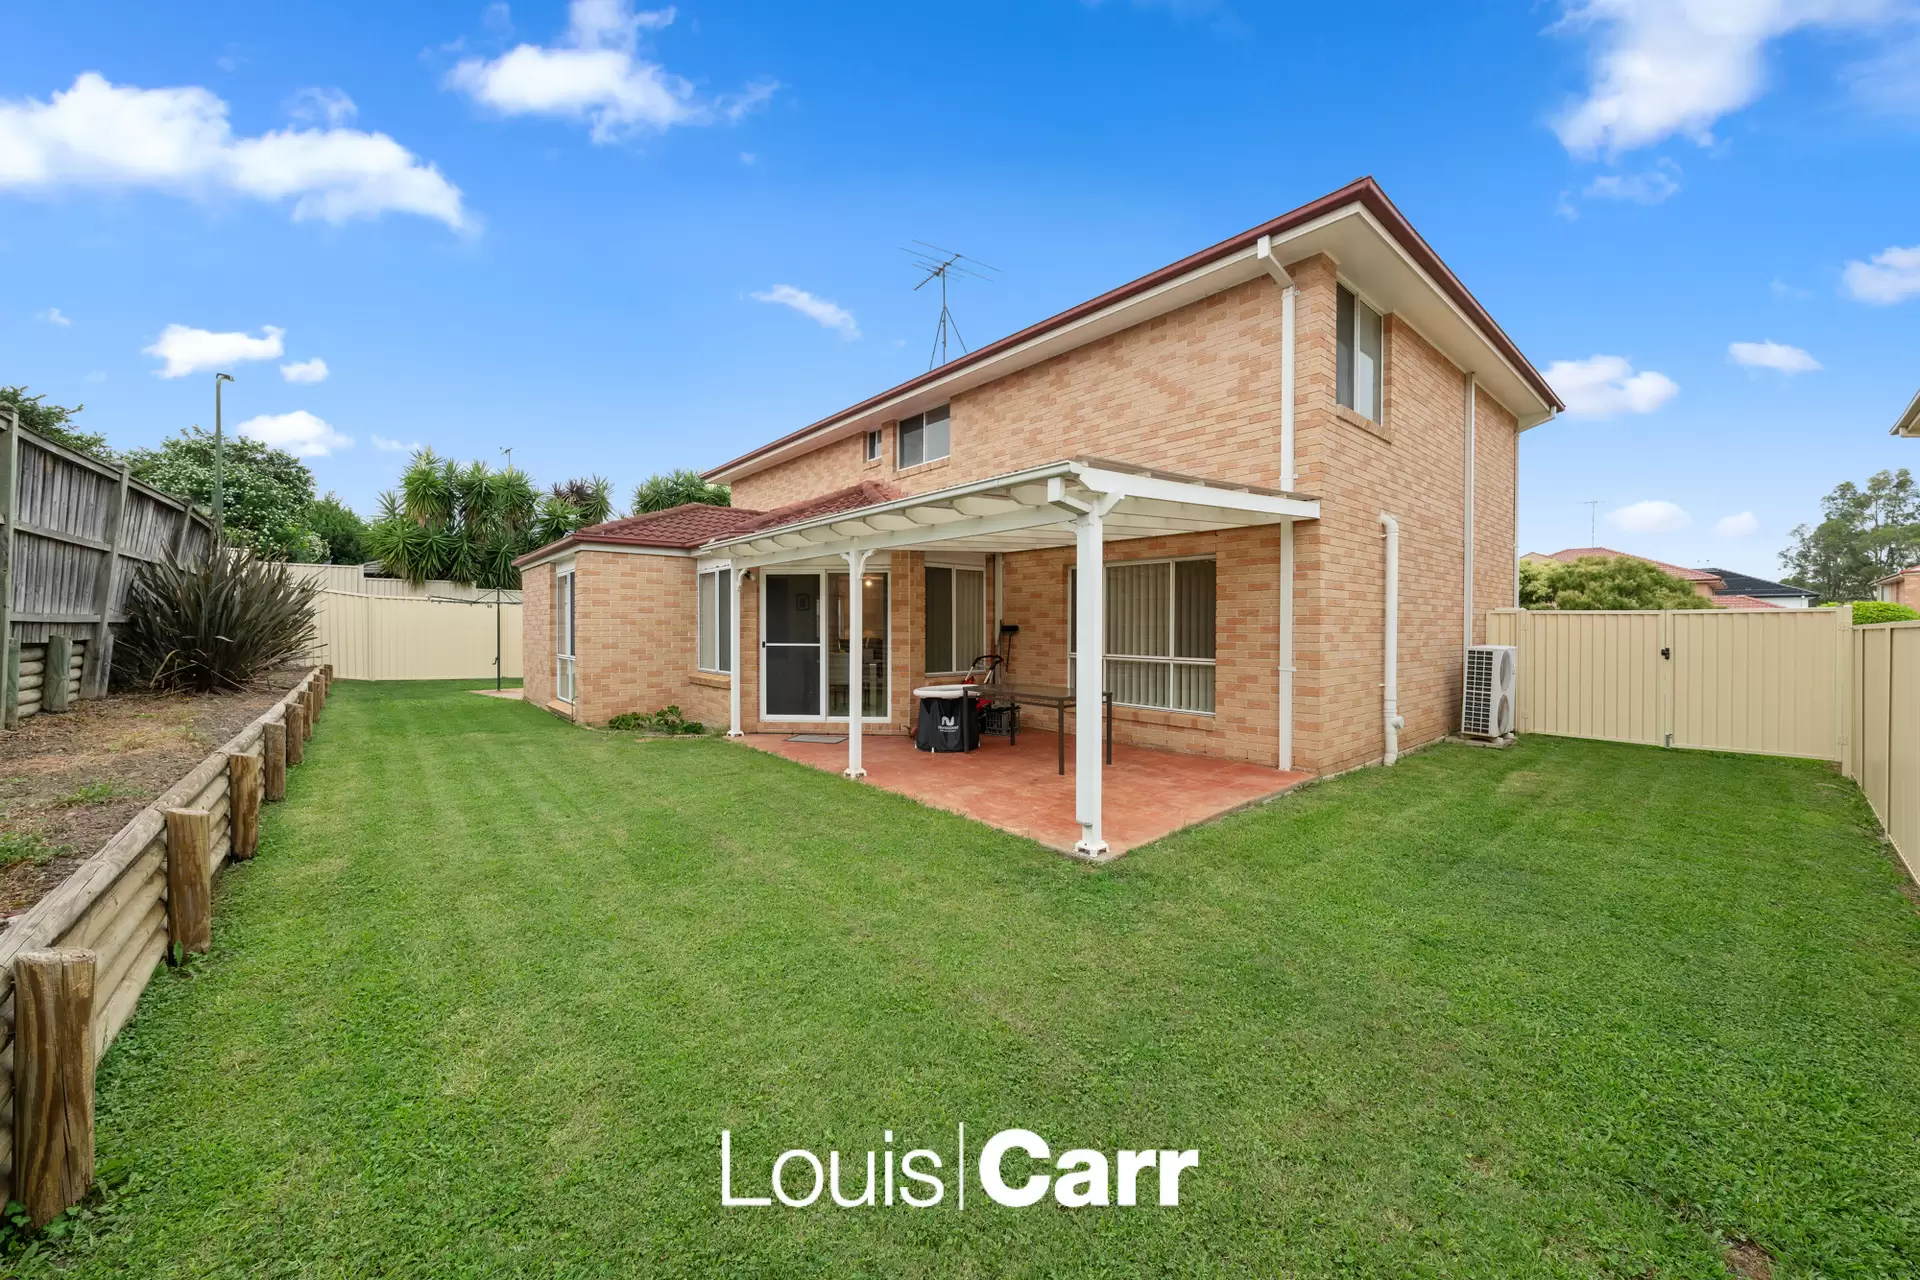 Photo #15: 29 Macquarie Avenue, Kellyville - Leased by Louis Carr Real Estate